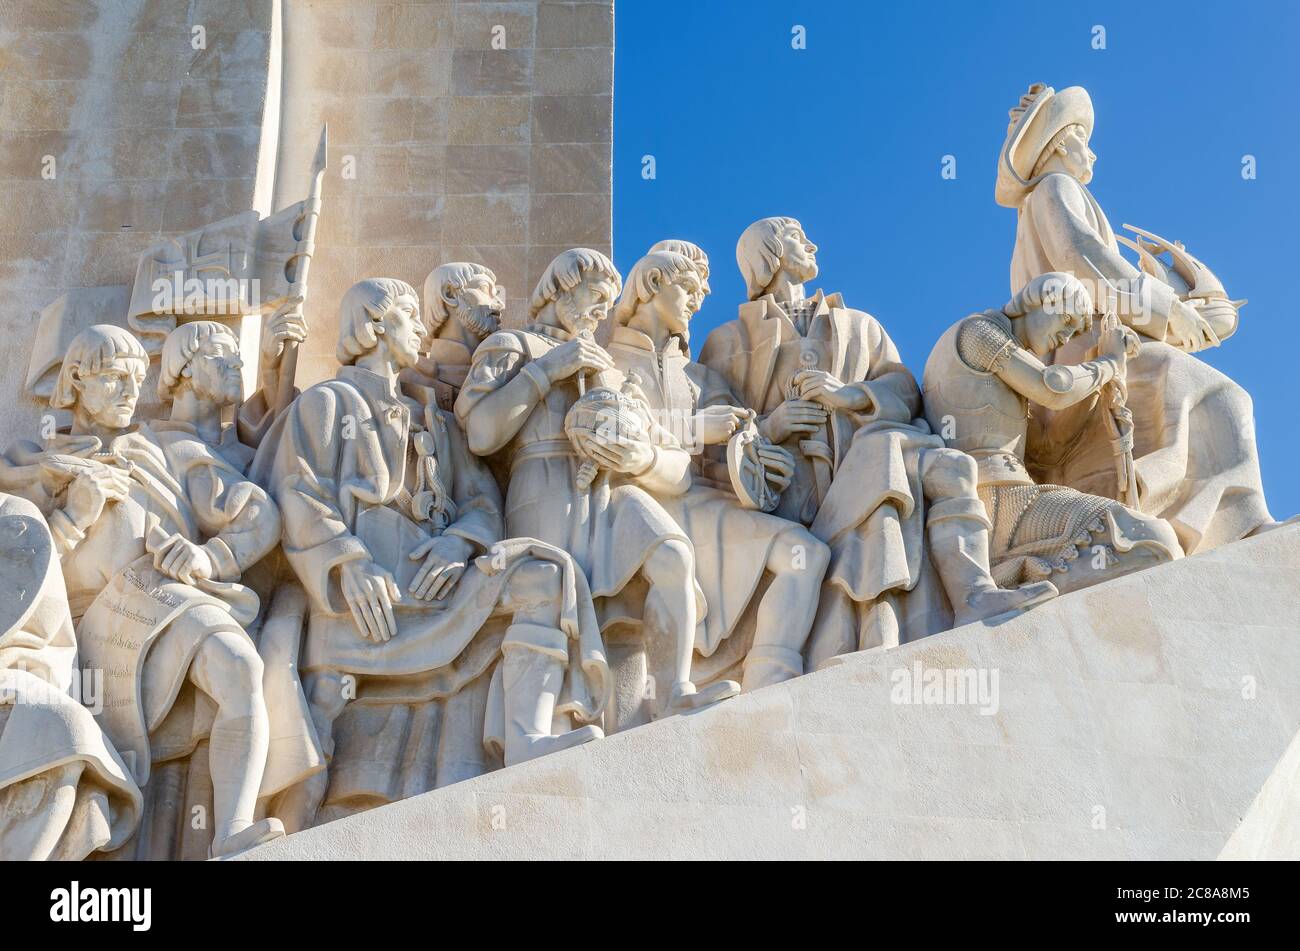 Padrao dos descobrimentos, monument to portuguese discoveries in lisbon, with clear blue sky and sunlight. Detail of the figures of the monument Stock Photo